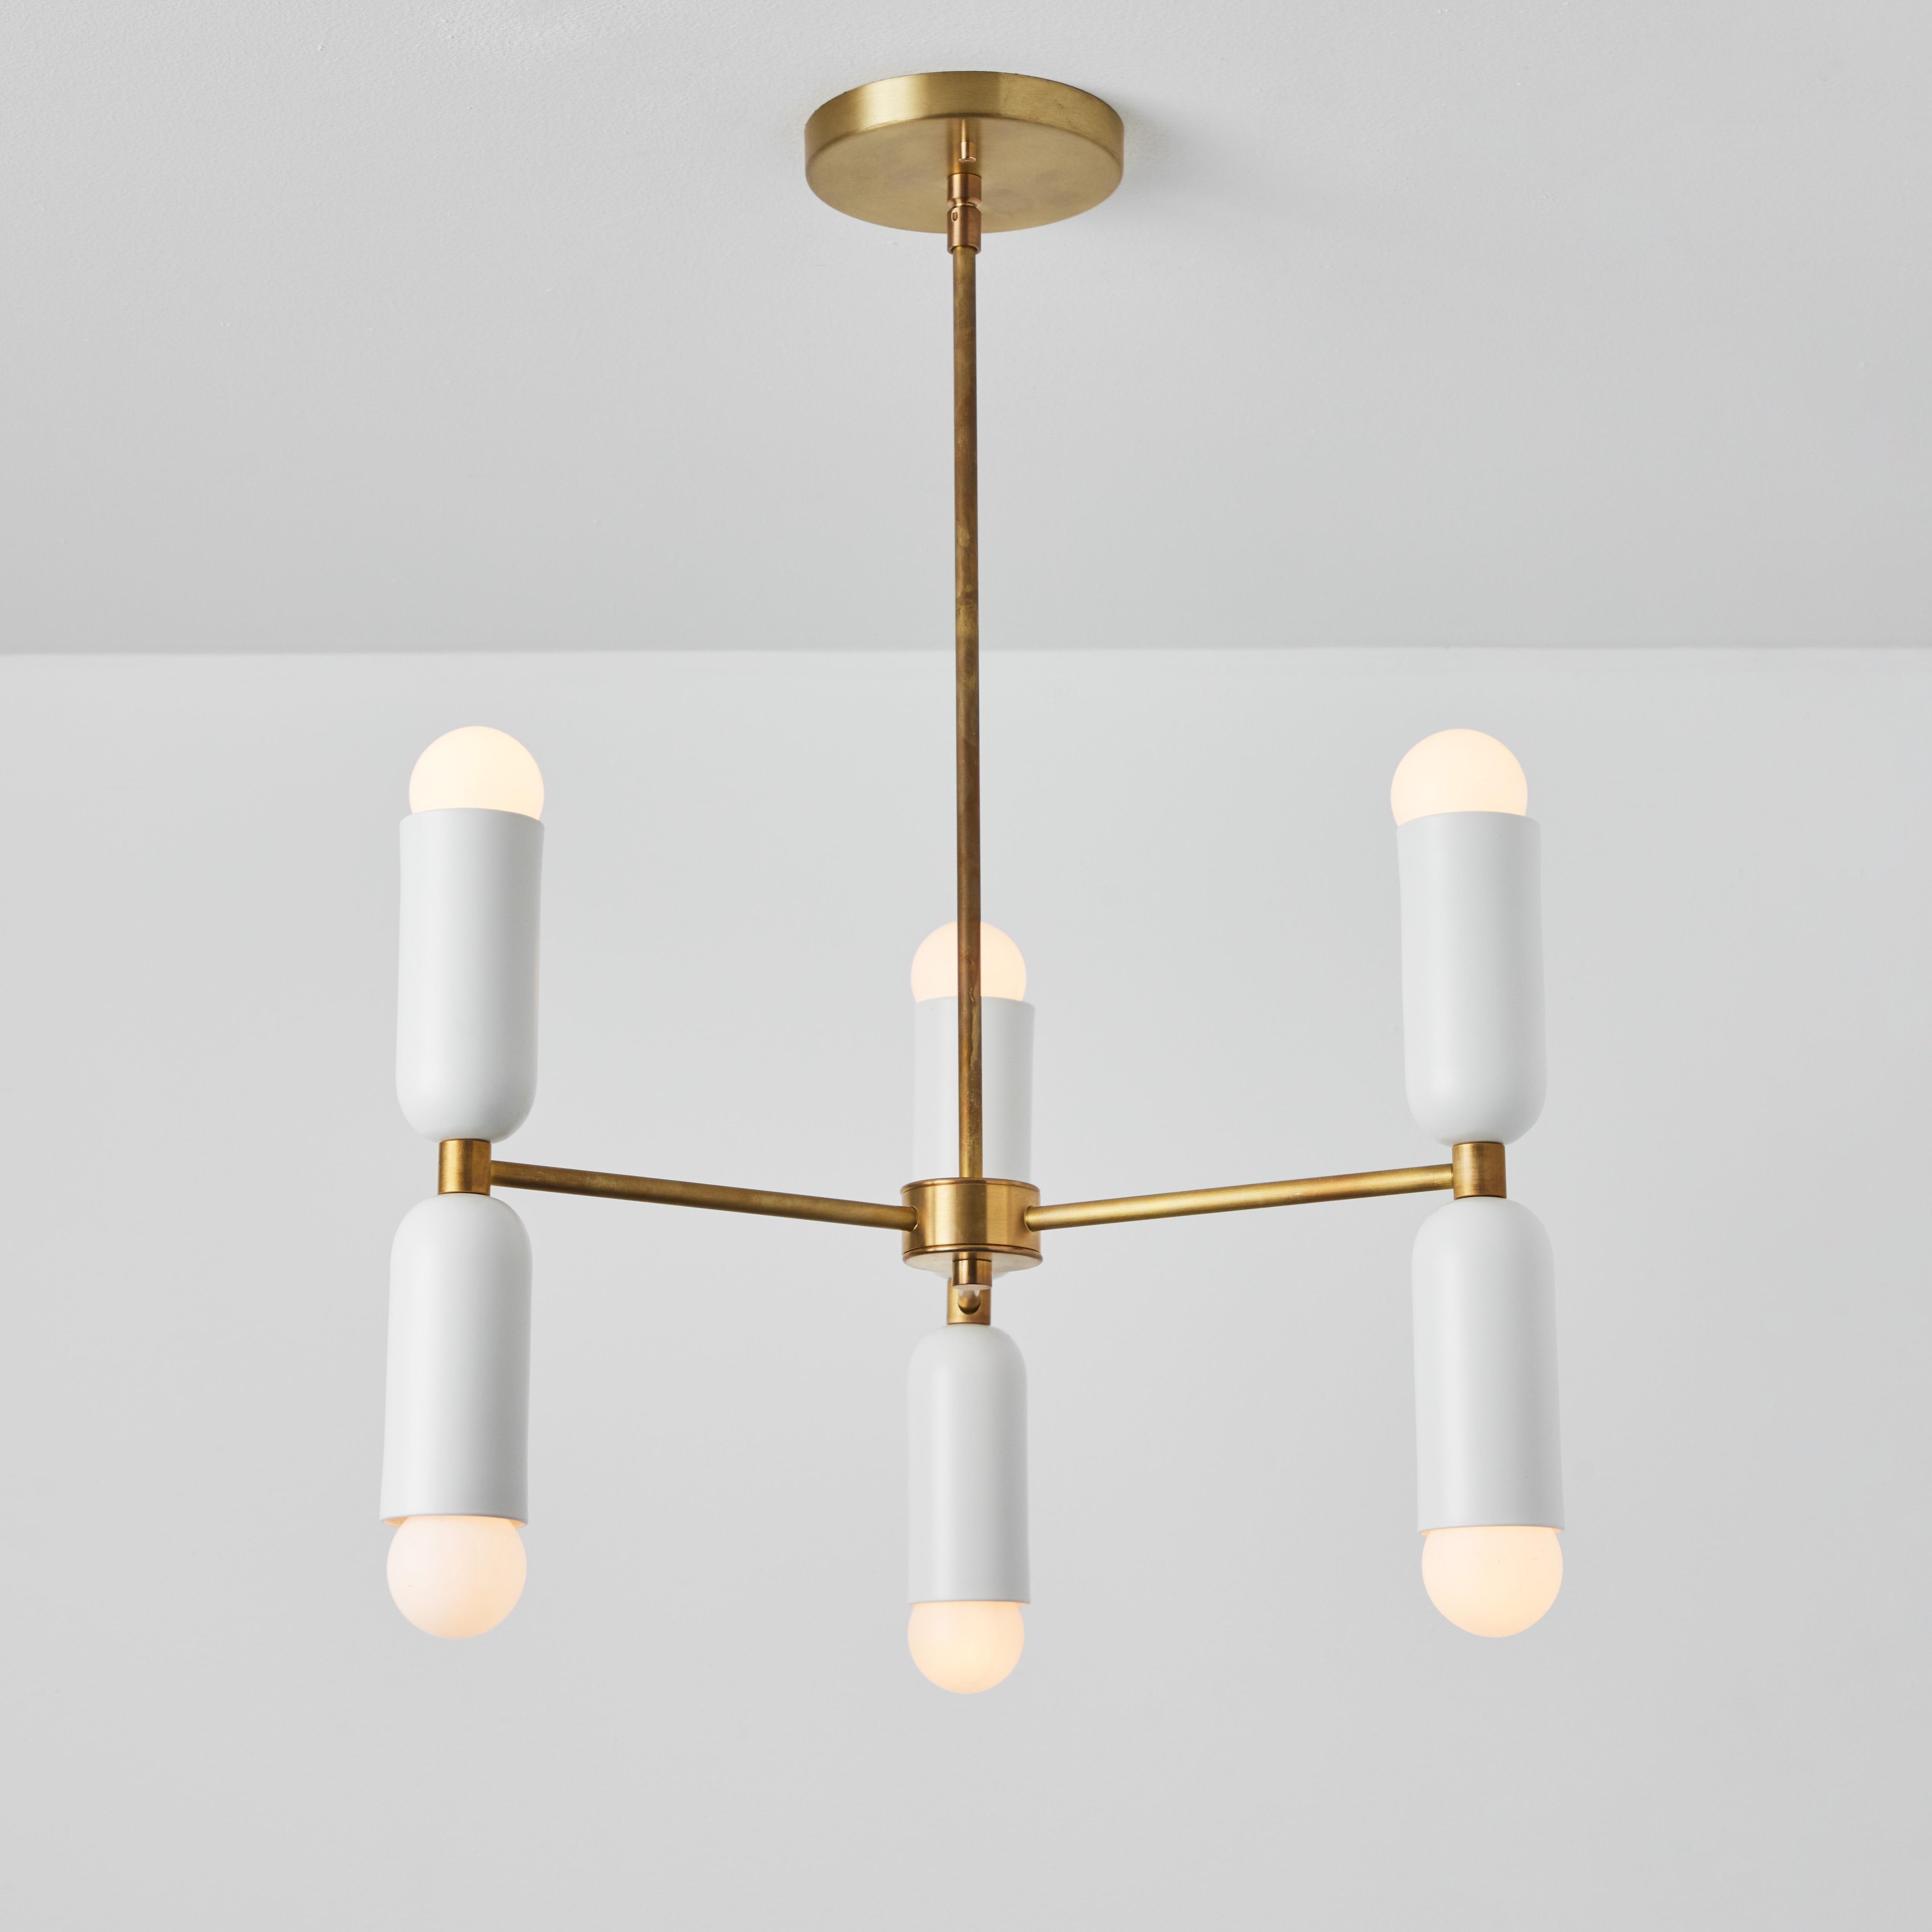 'Lulu' 3-arm chandelier in white & brass by Alvaro Benitez. Hand-fabricated by Los Angeles based designer and lighting professional Alvaro Benitez, these highly refined chandeliers are reminiscent of the iconic midcentury Italian designs of Arteluce